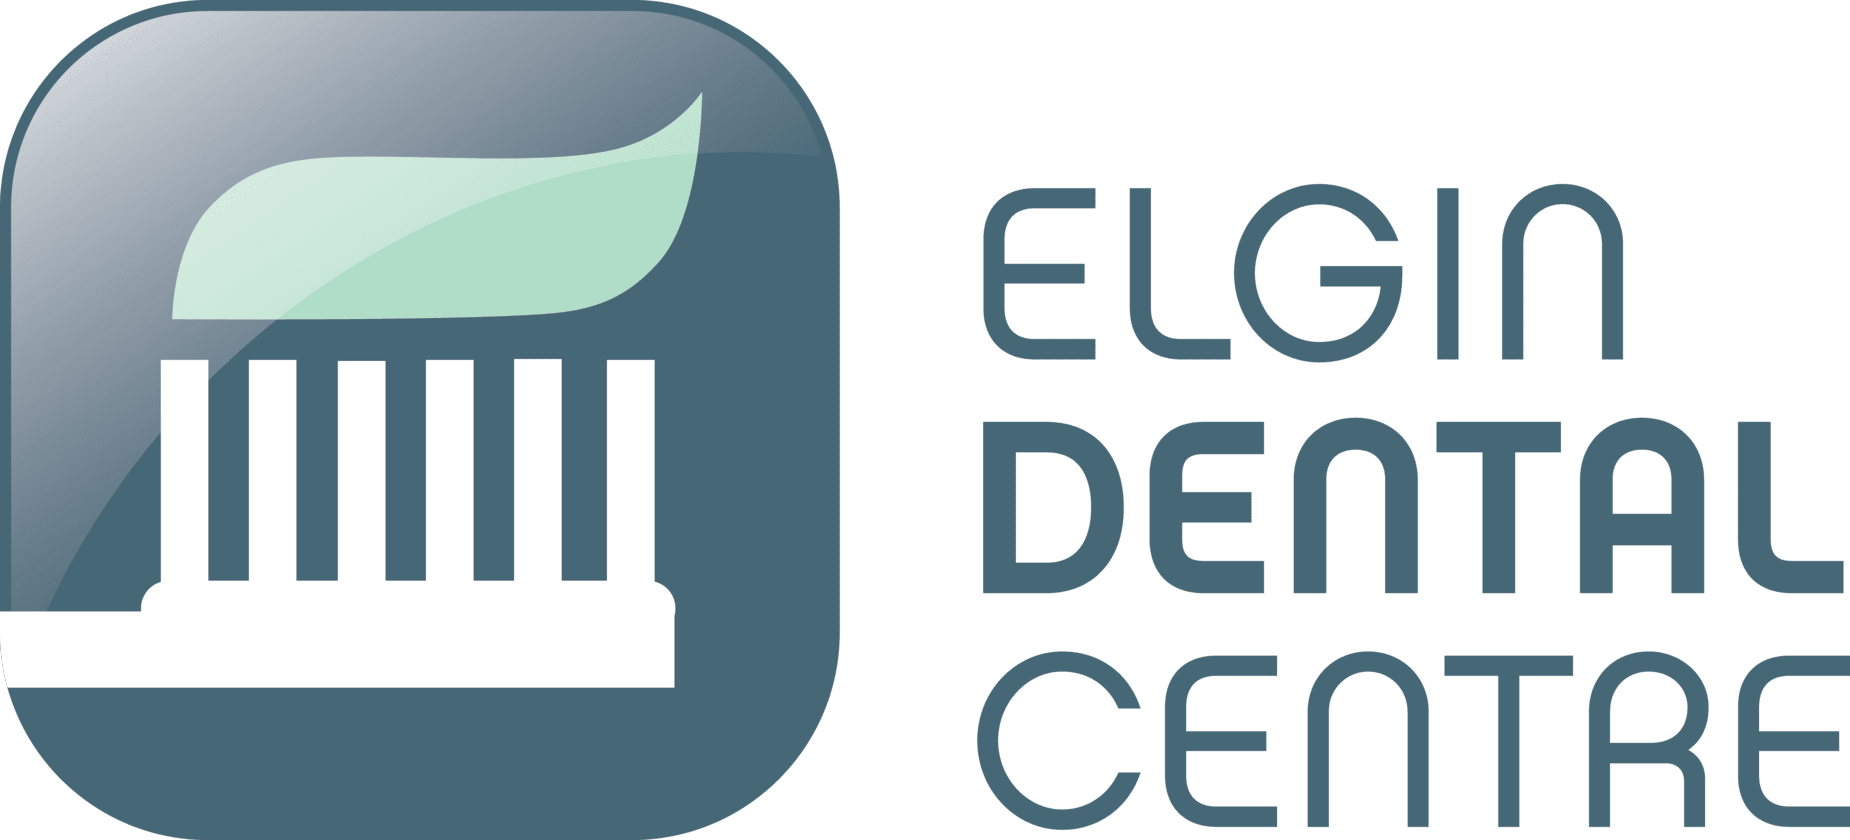 The elgin dental centre logo is a toothbrush with a leaf on it.